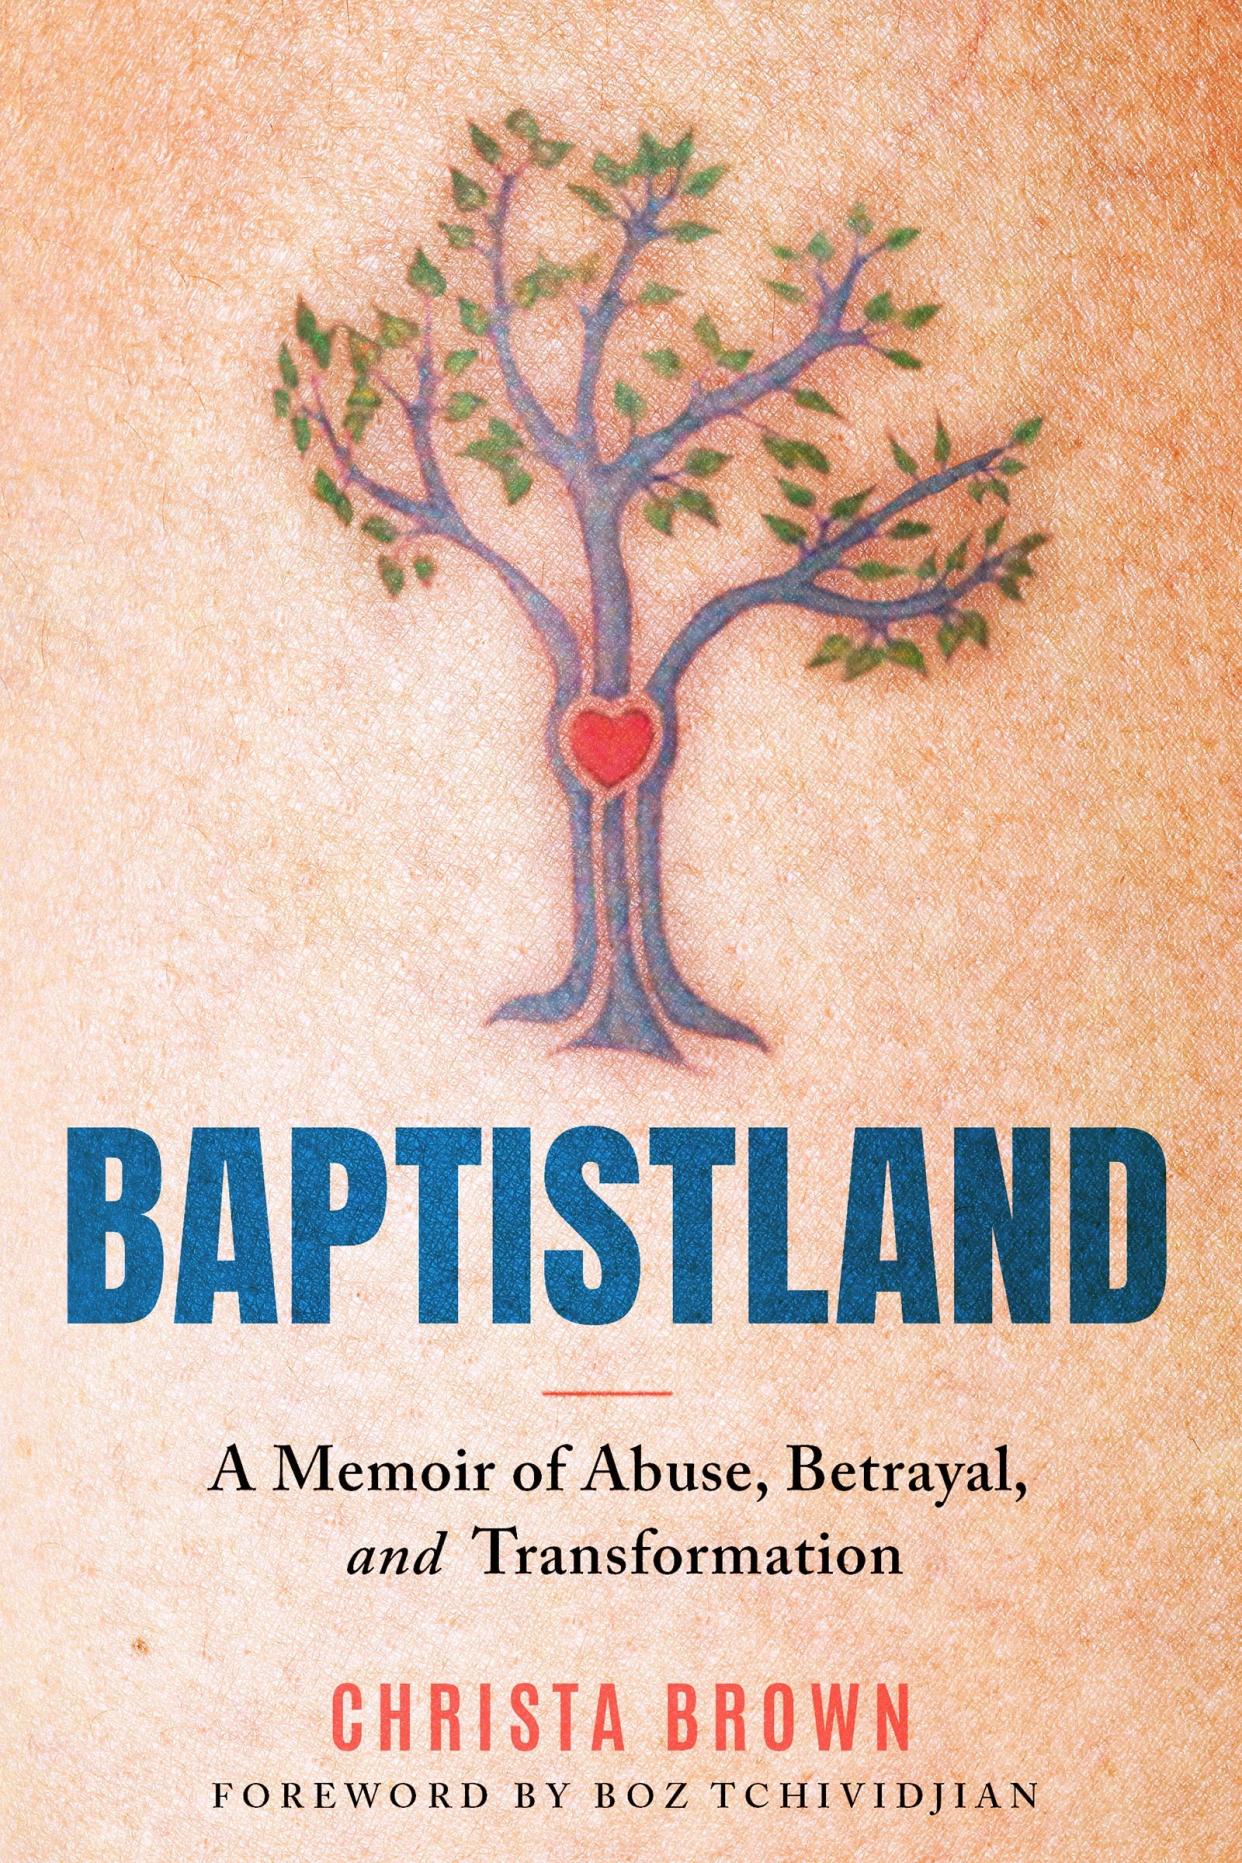 Christa Brown's new book, “Baptistland: A Memoir of Abuse, Betrayal, and Transformation,” traces the author's journey with her family and in her advocacy for abuse reform in the Southern Baptist Convention. It's Brown's second book after “This Little Light: Beyond a Baptist Preacher and His Gang,” which she published in 2009.